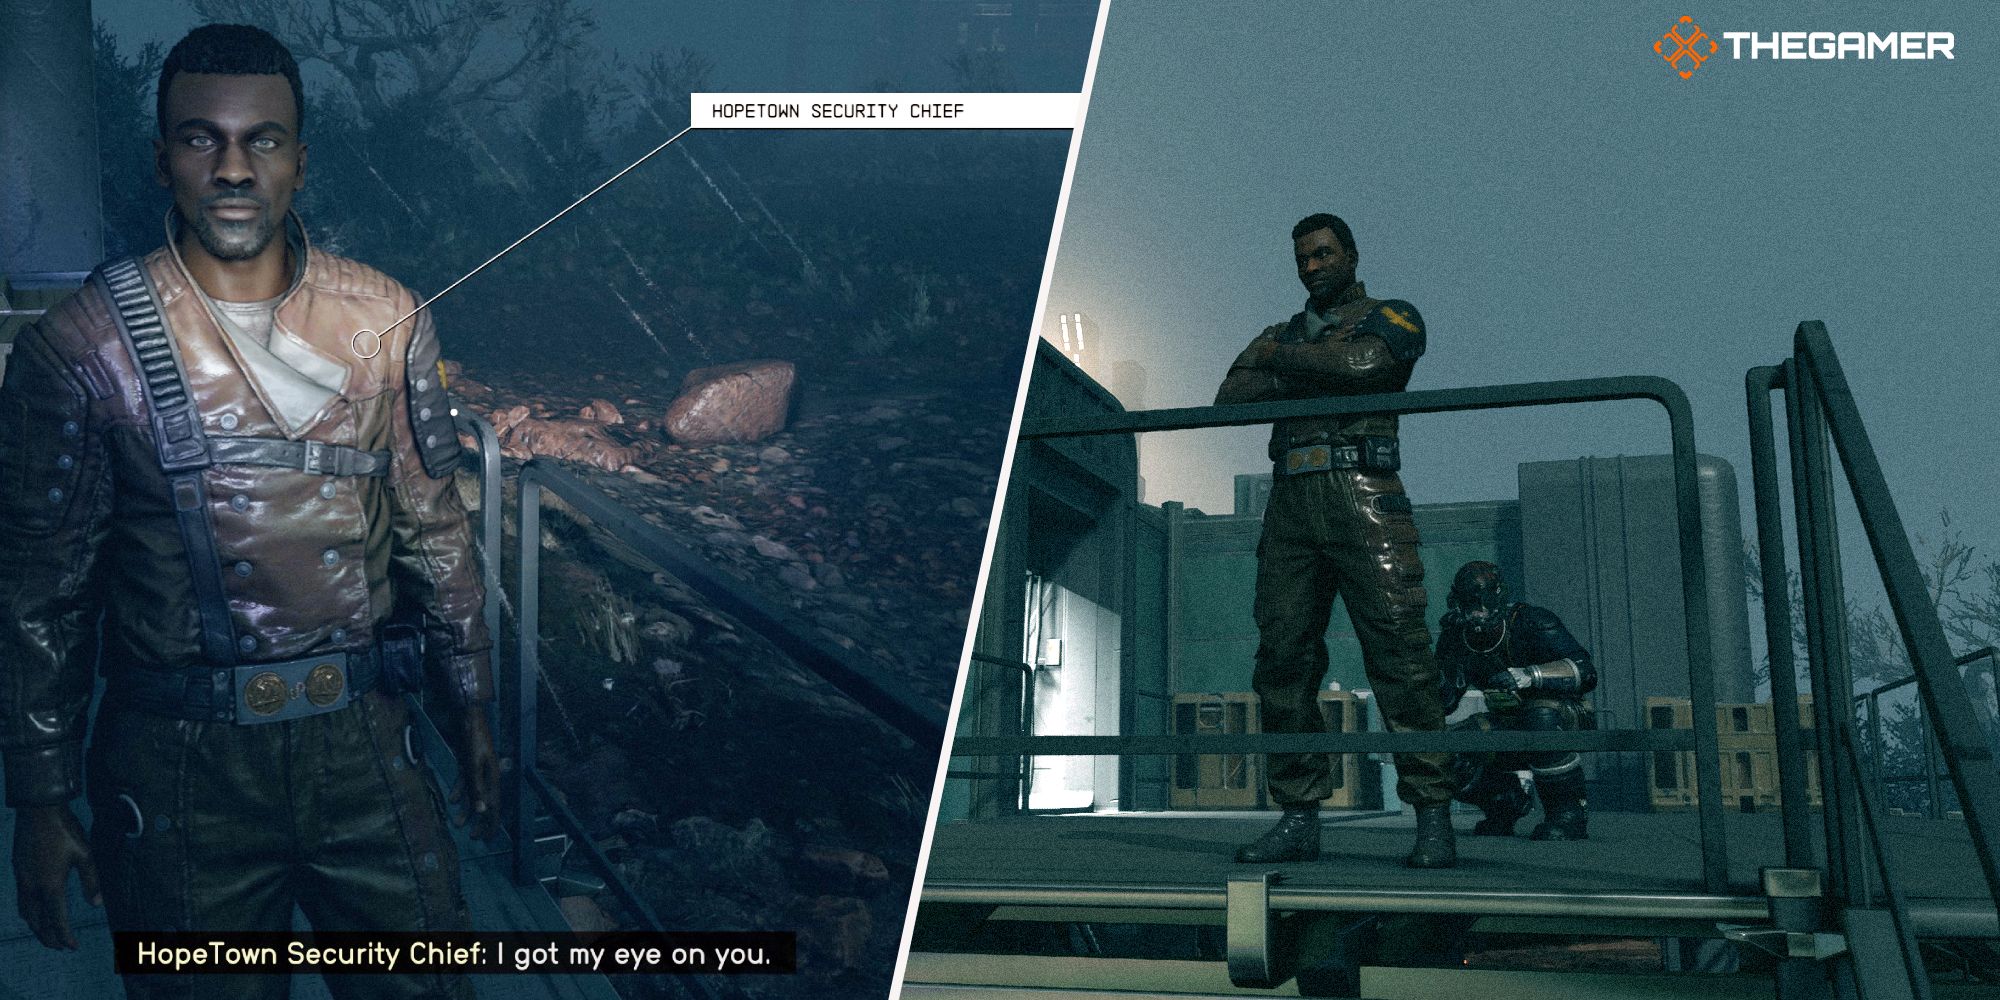 Left: The Security Chief explaining he's got his eye on the protagonist. Right: Protagonist stealing from the chief 